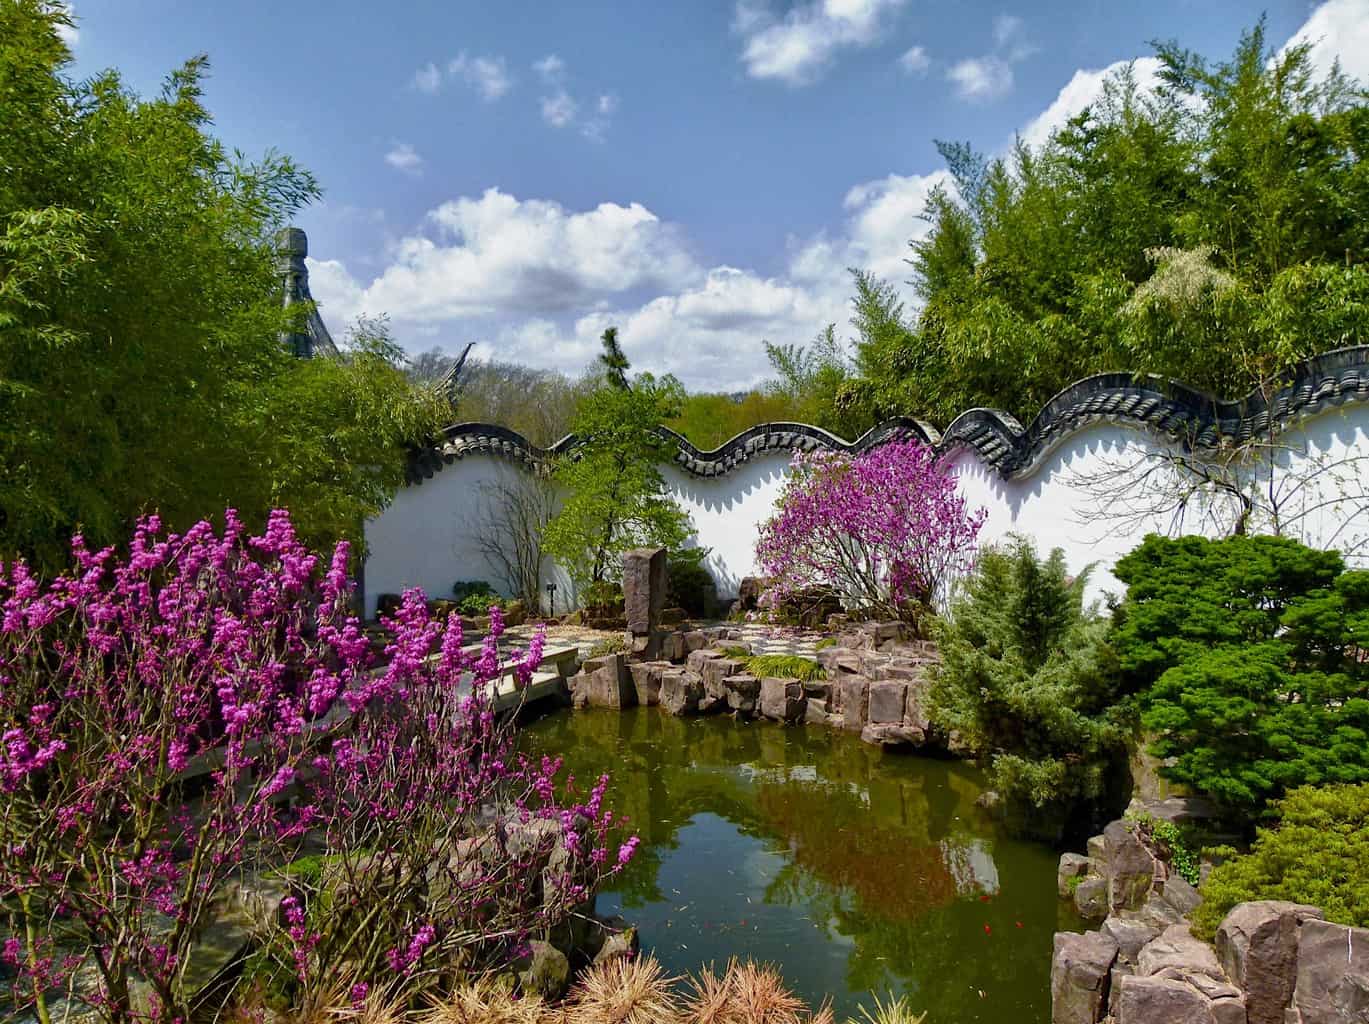 The quiet beauty of the Chinese Scholar's Garden with its vibrant colored flowers and pond in Staten Island is one of the unusual things to do in NYC that you should not miss..